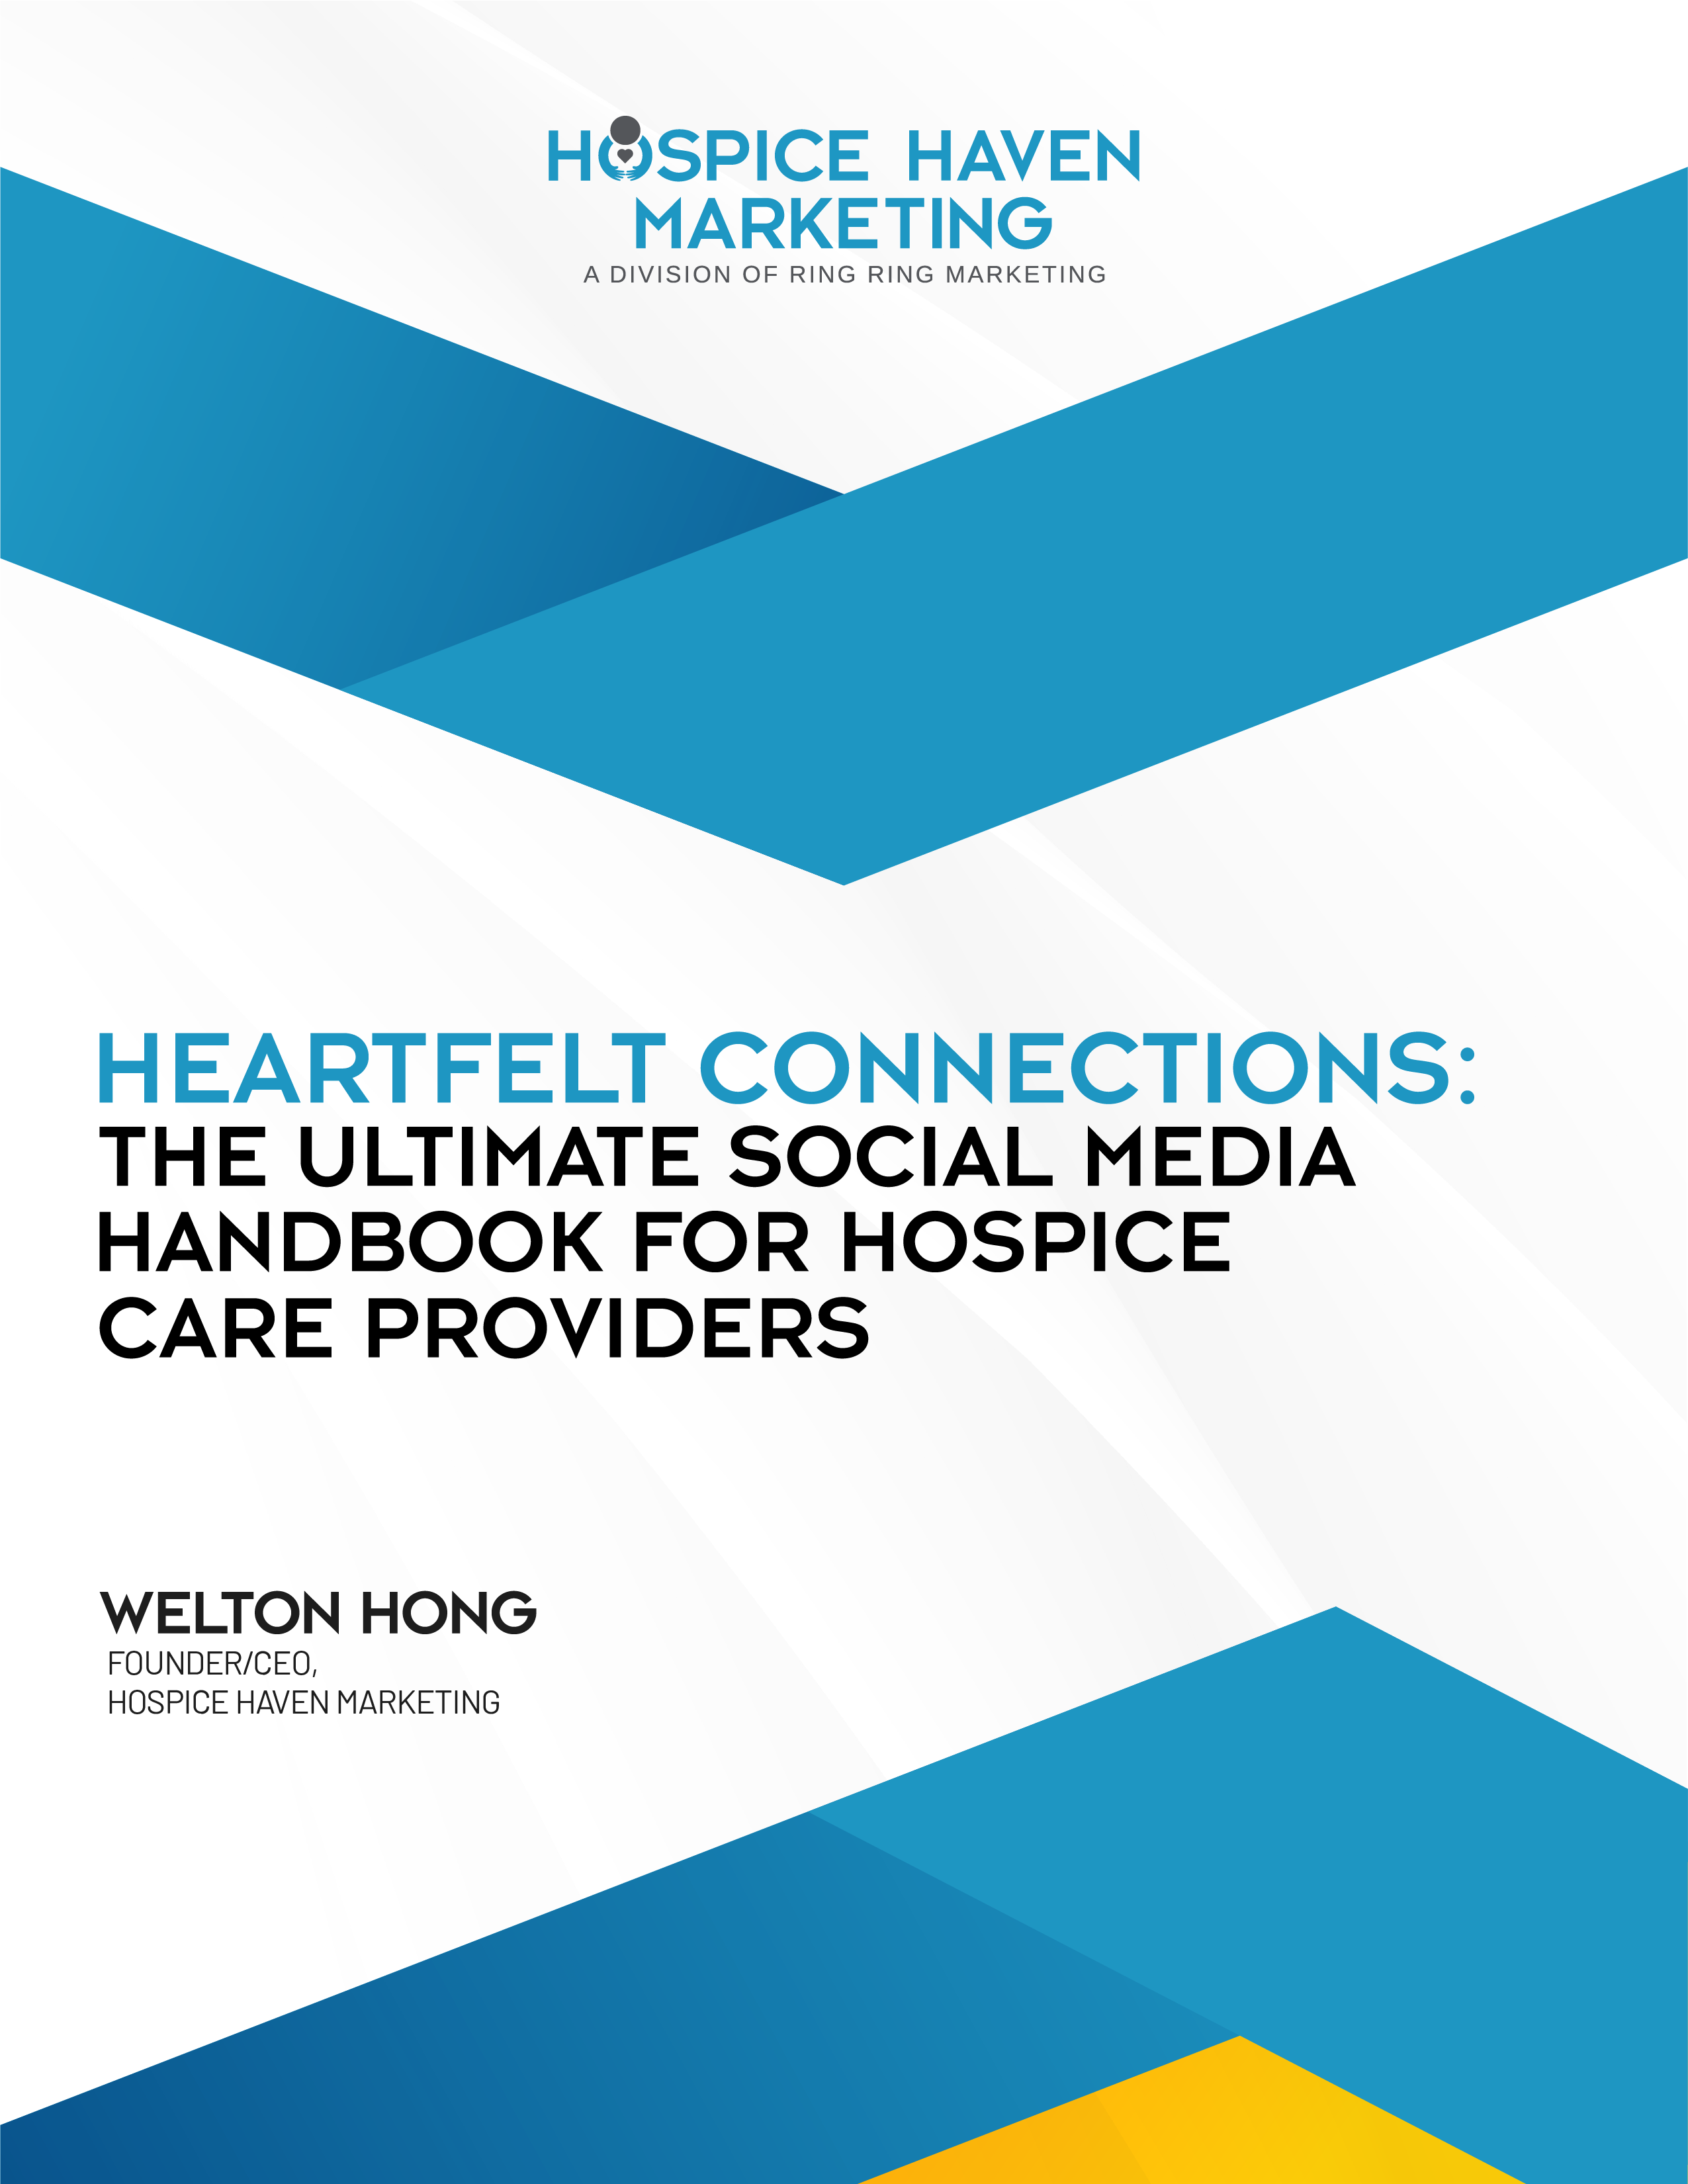 Heartfelt Connections: The Ultimate Social Media Handbook for Hospice Care Providers